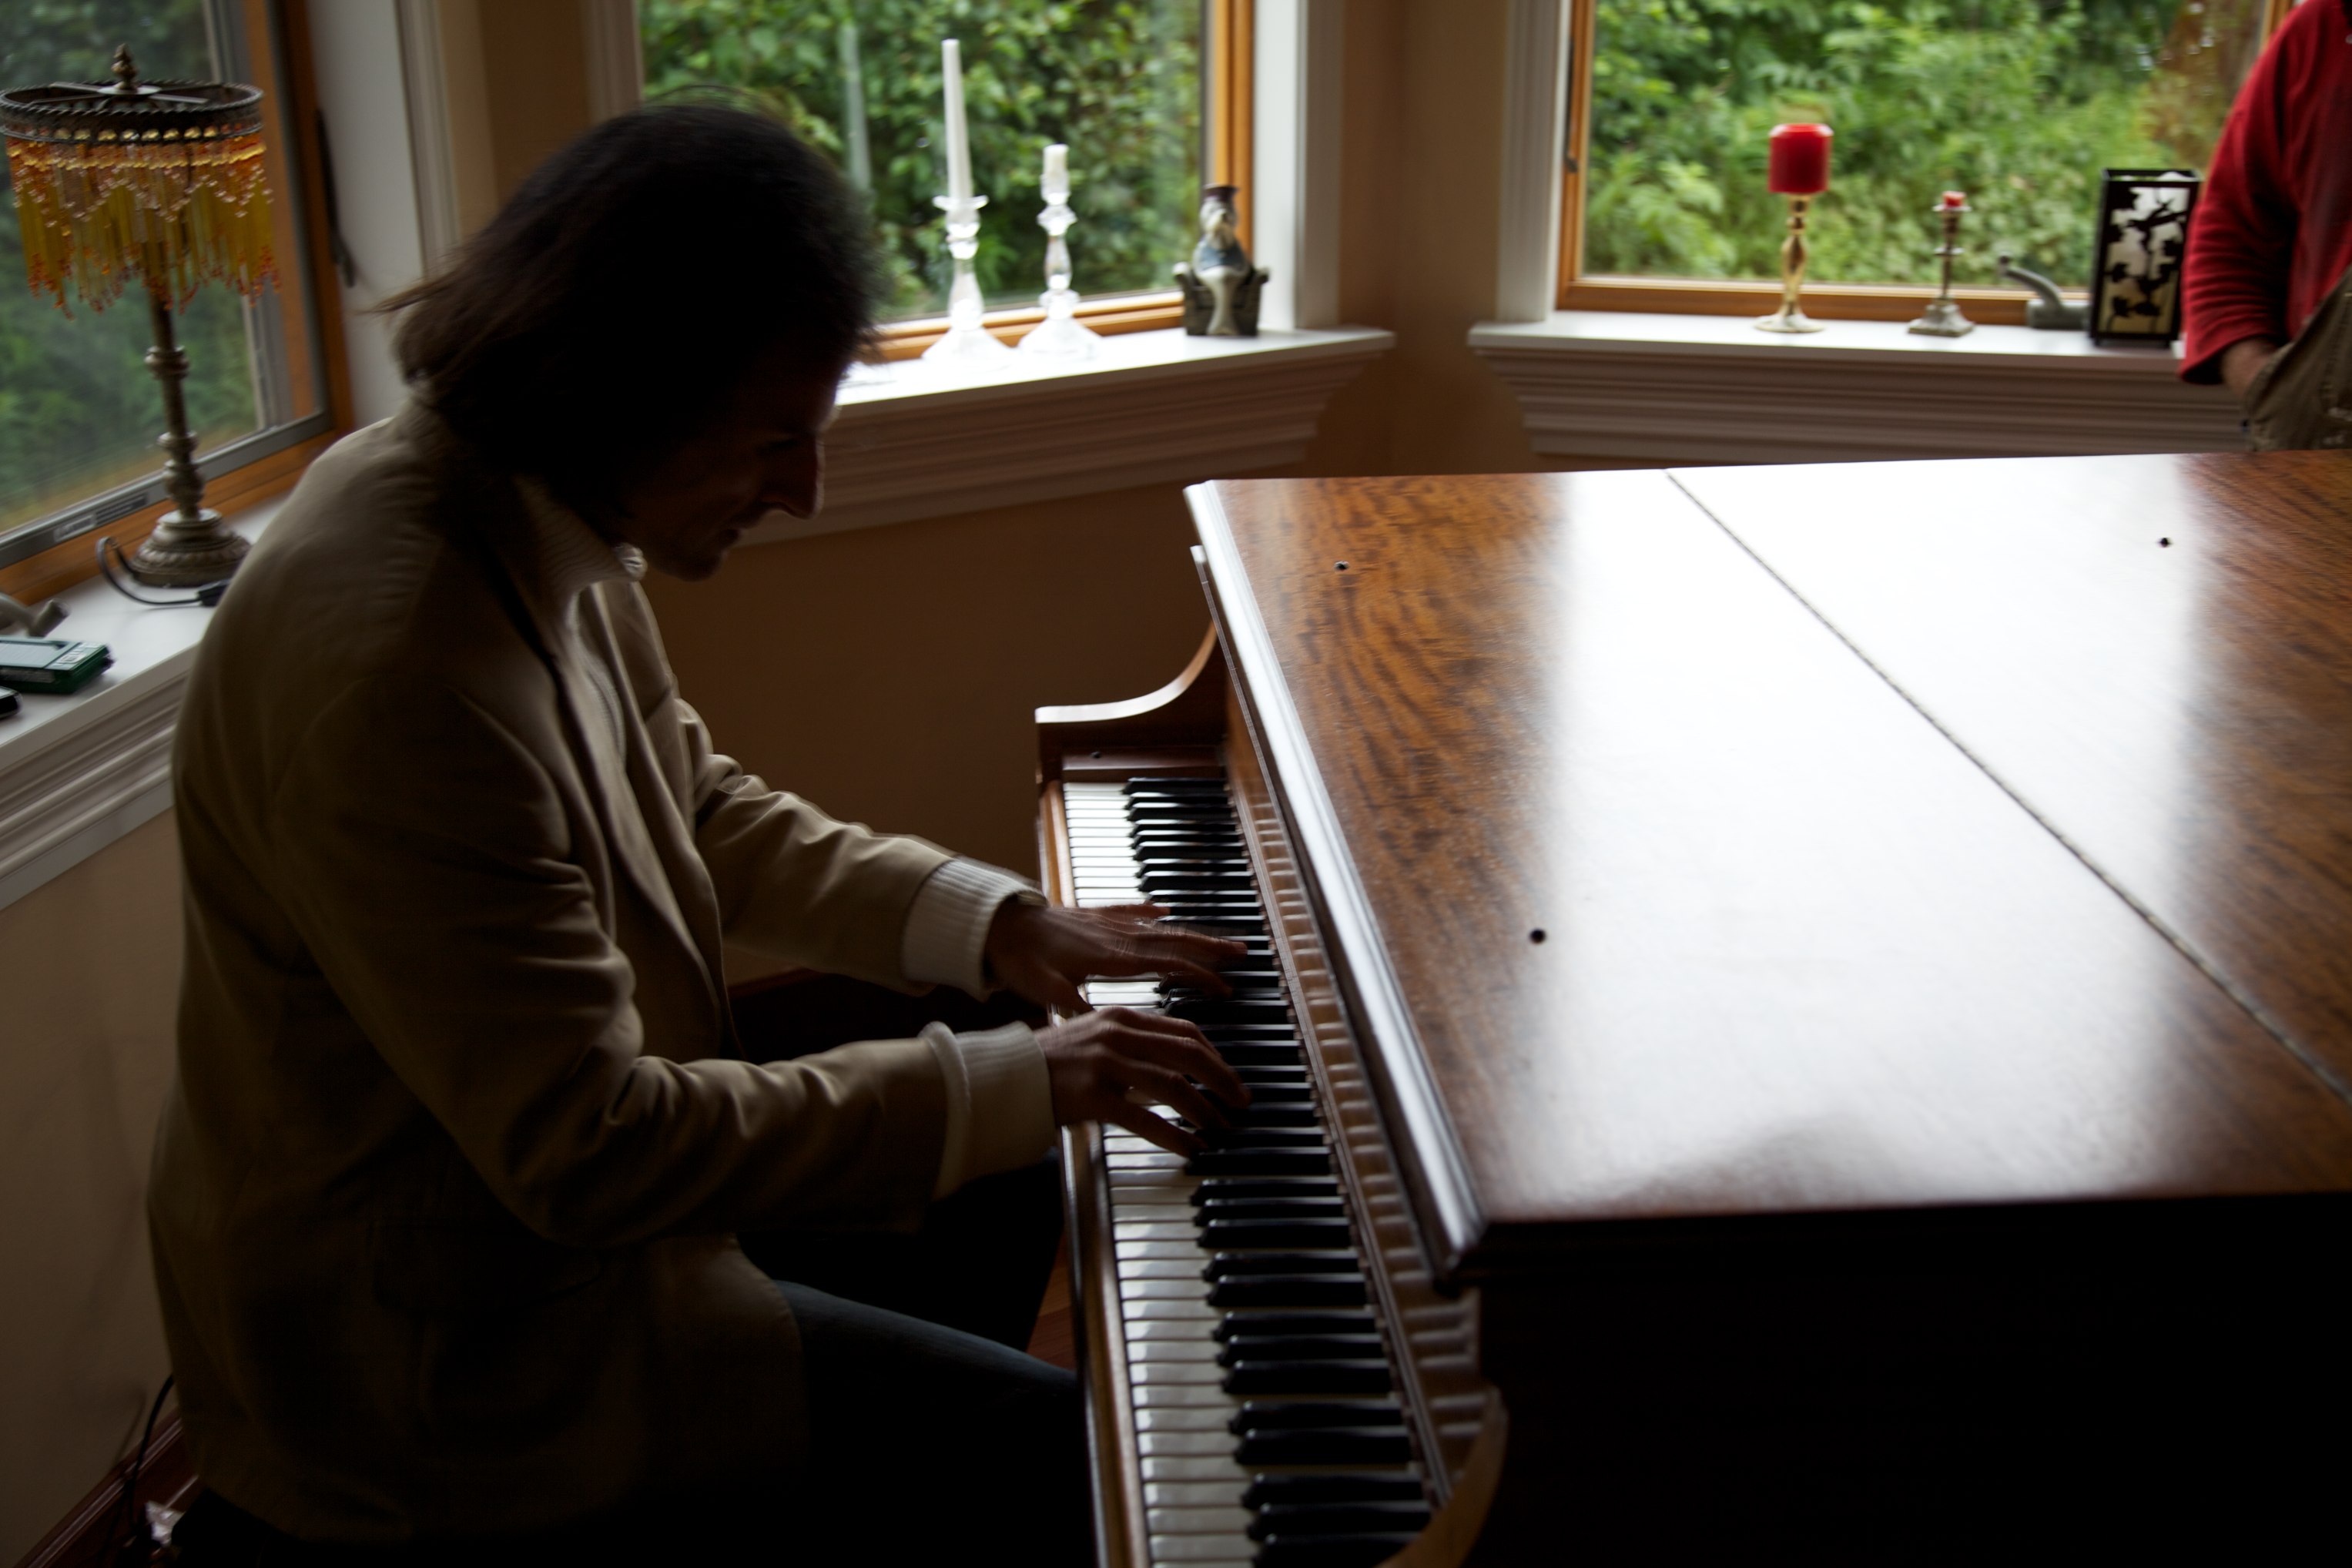 Piano Philippe Durand playing Frederic Chopin in preparation of the film